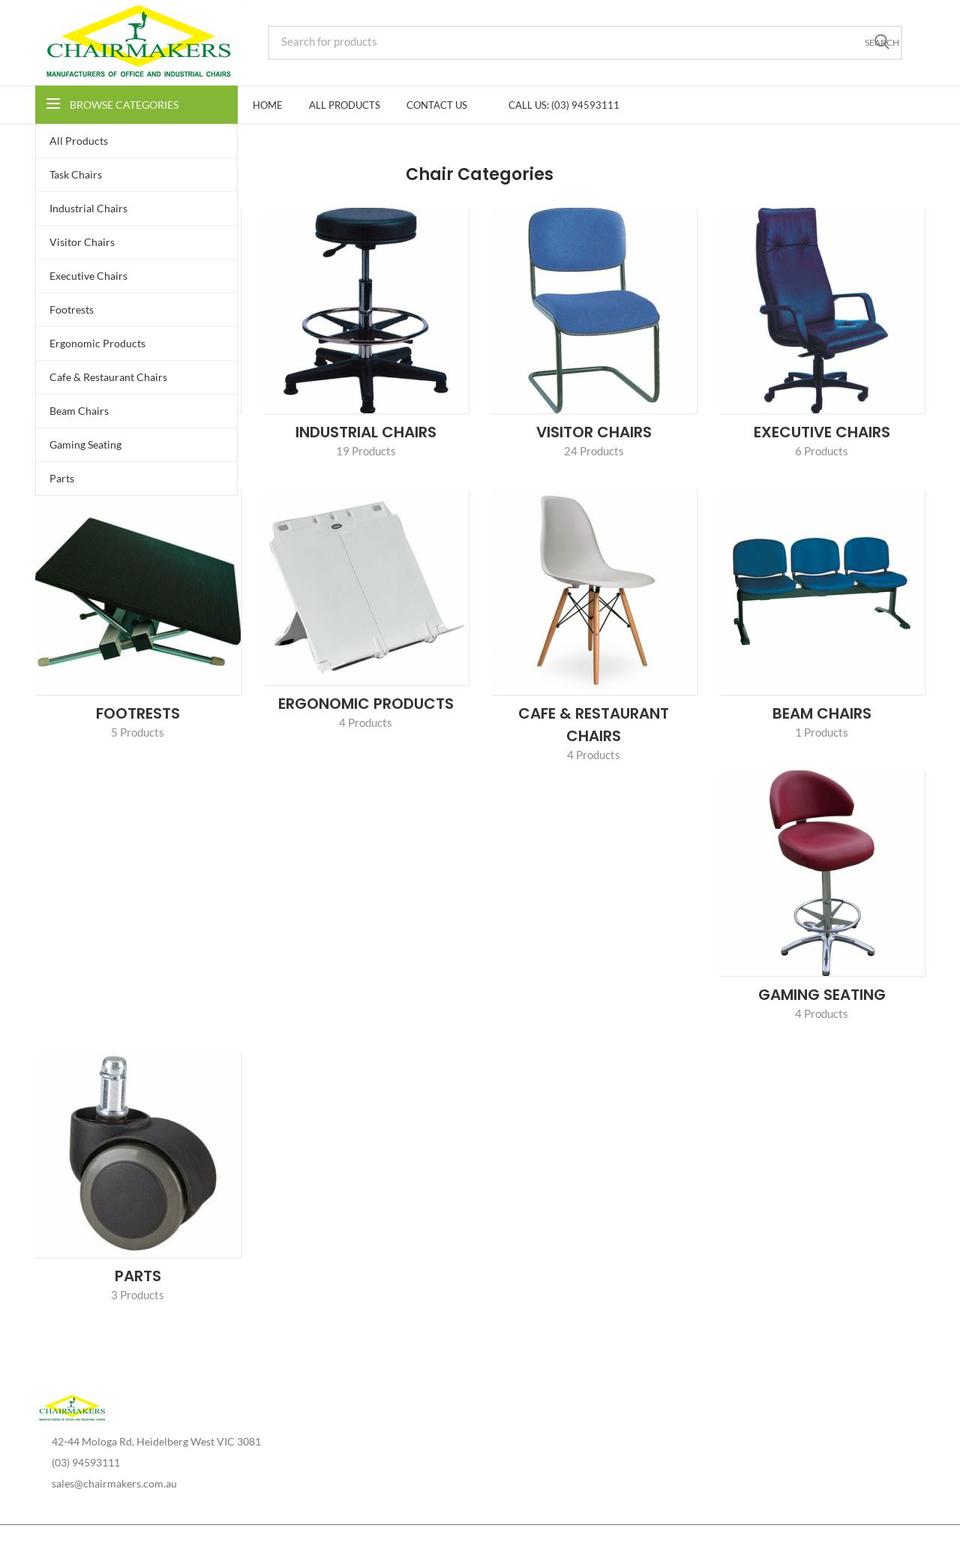 Woodmart Shopify theme site example chairmakers.com.au